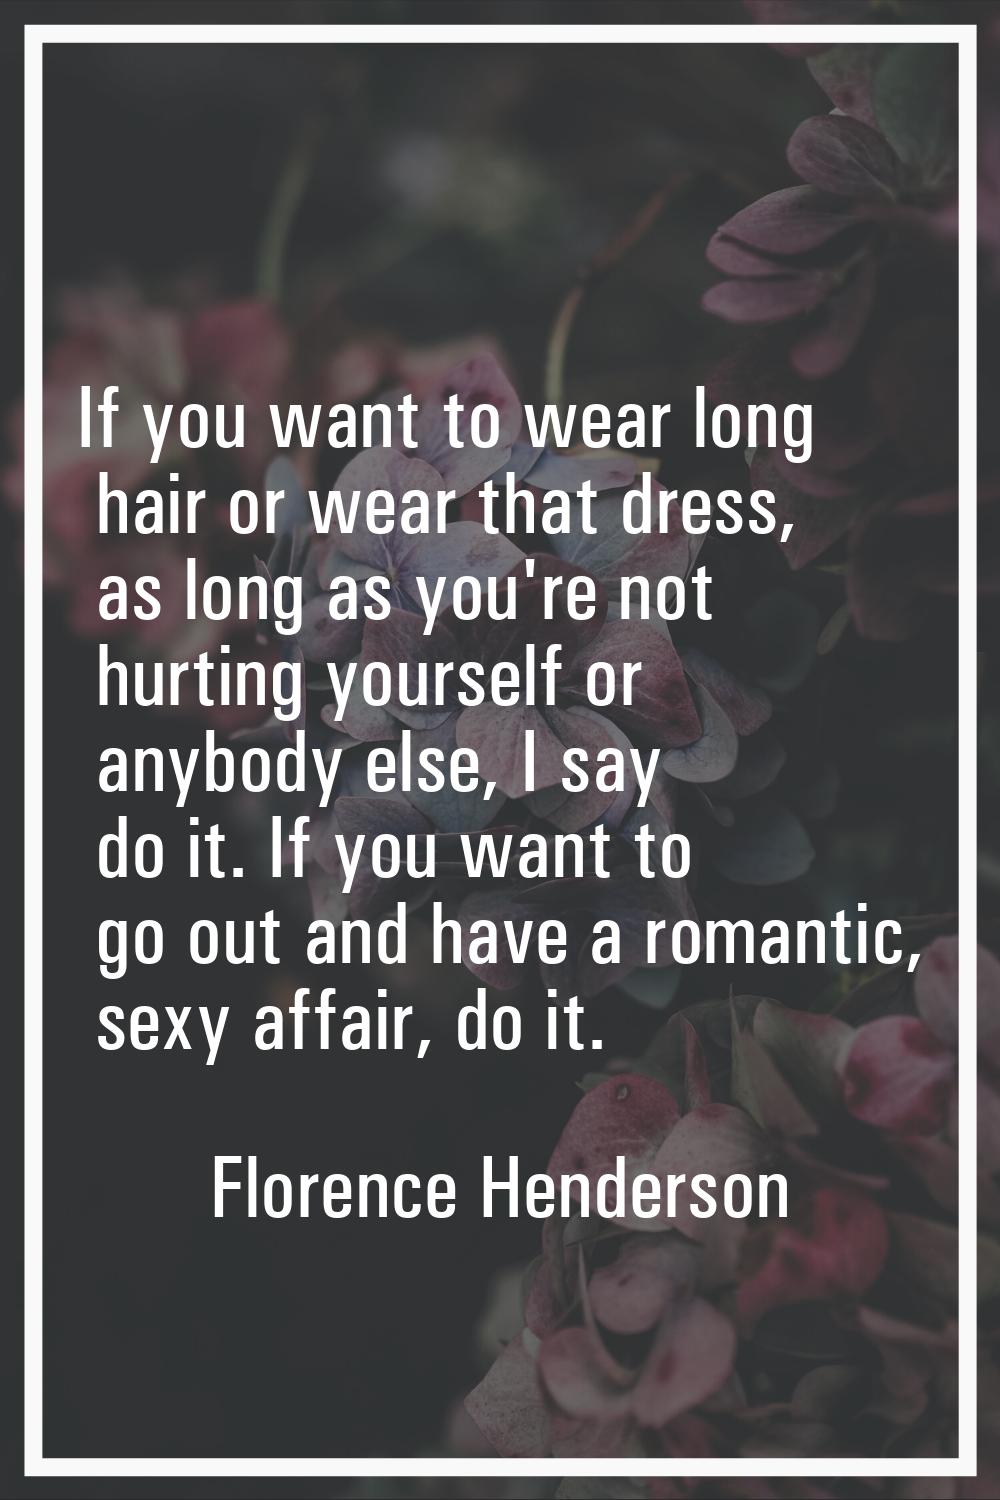 If you want to wear long hair or wear that dress, as long as you're not hurting yourself or anybody